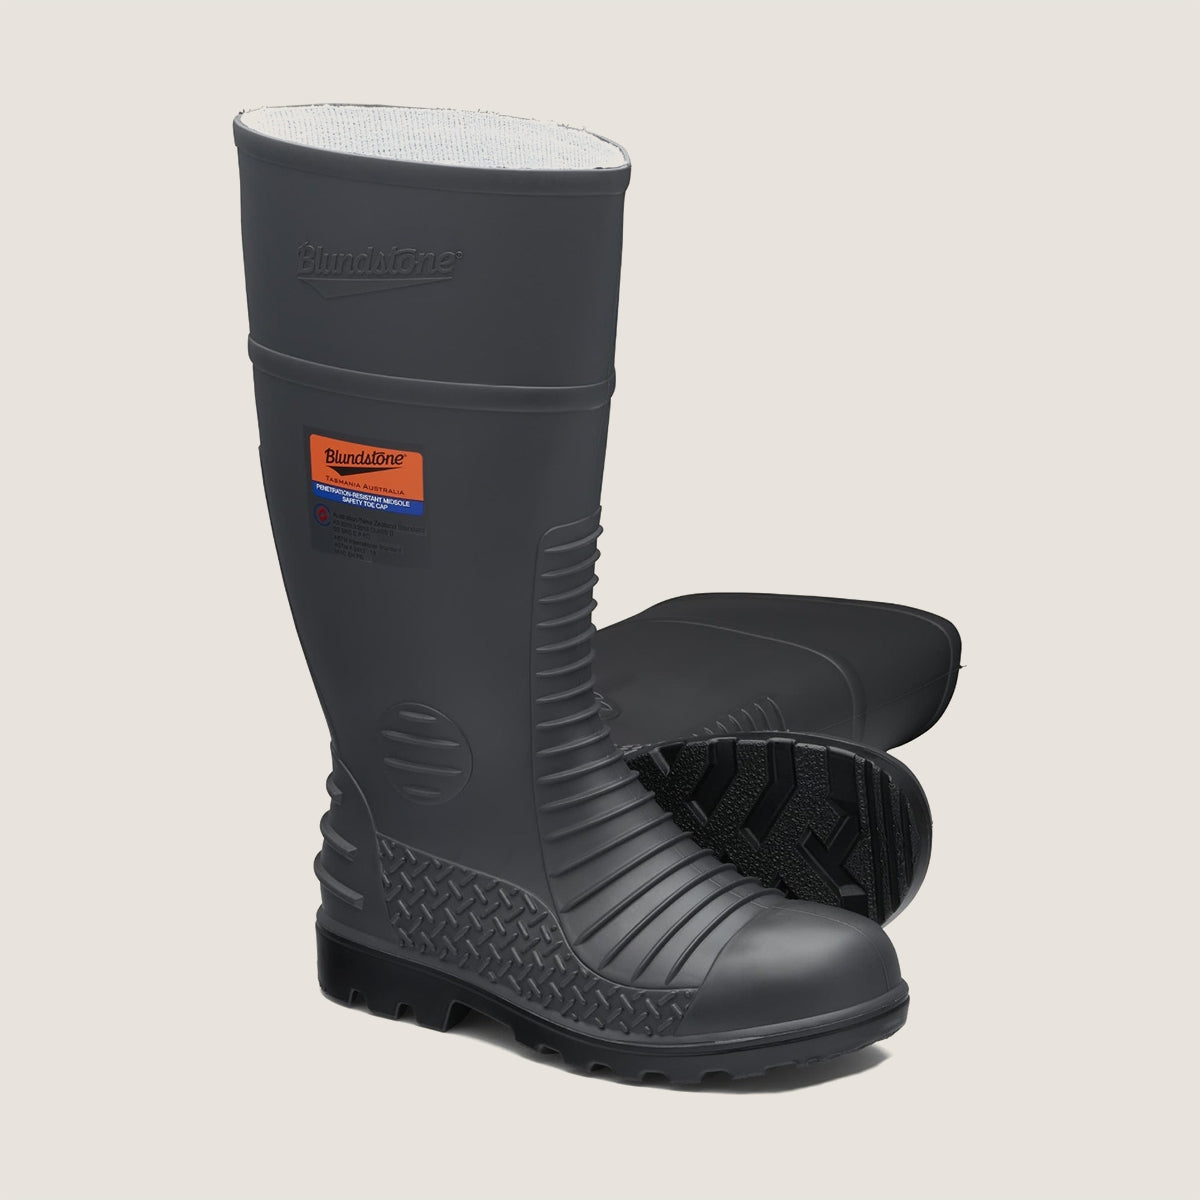 Blundstone Rubber Boots